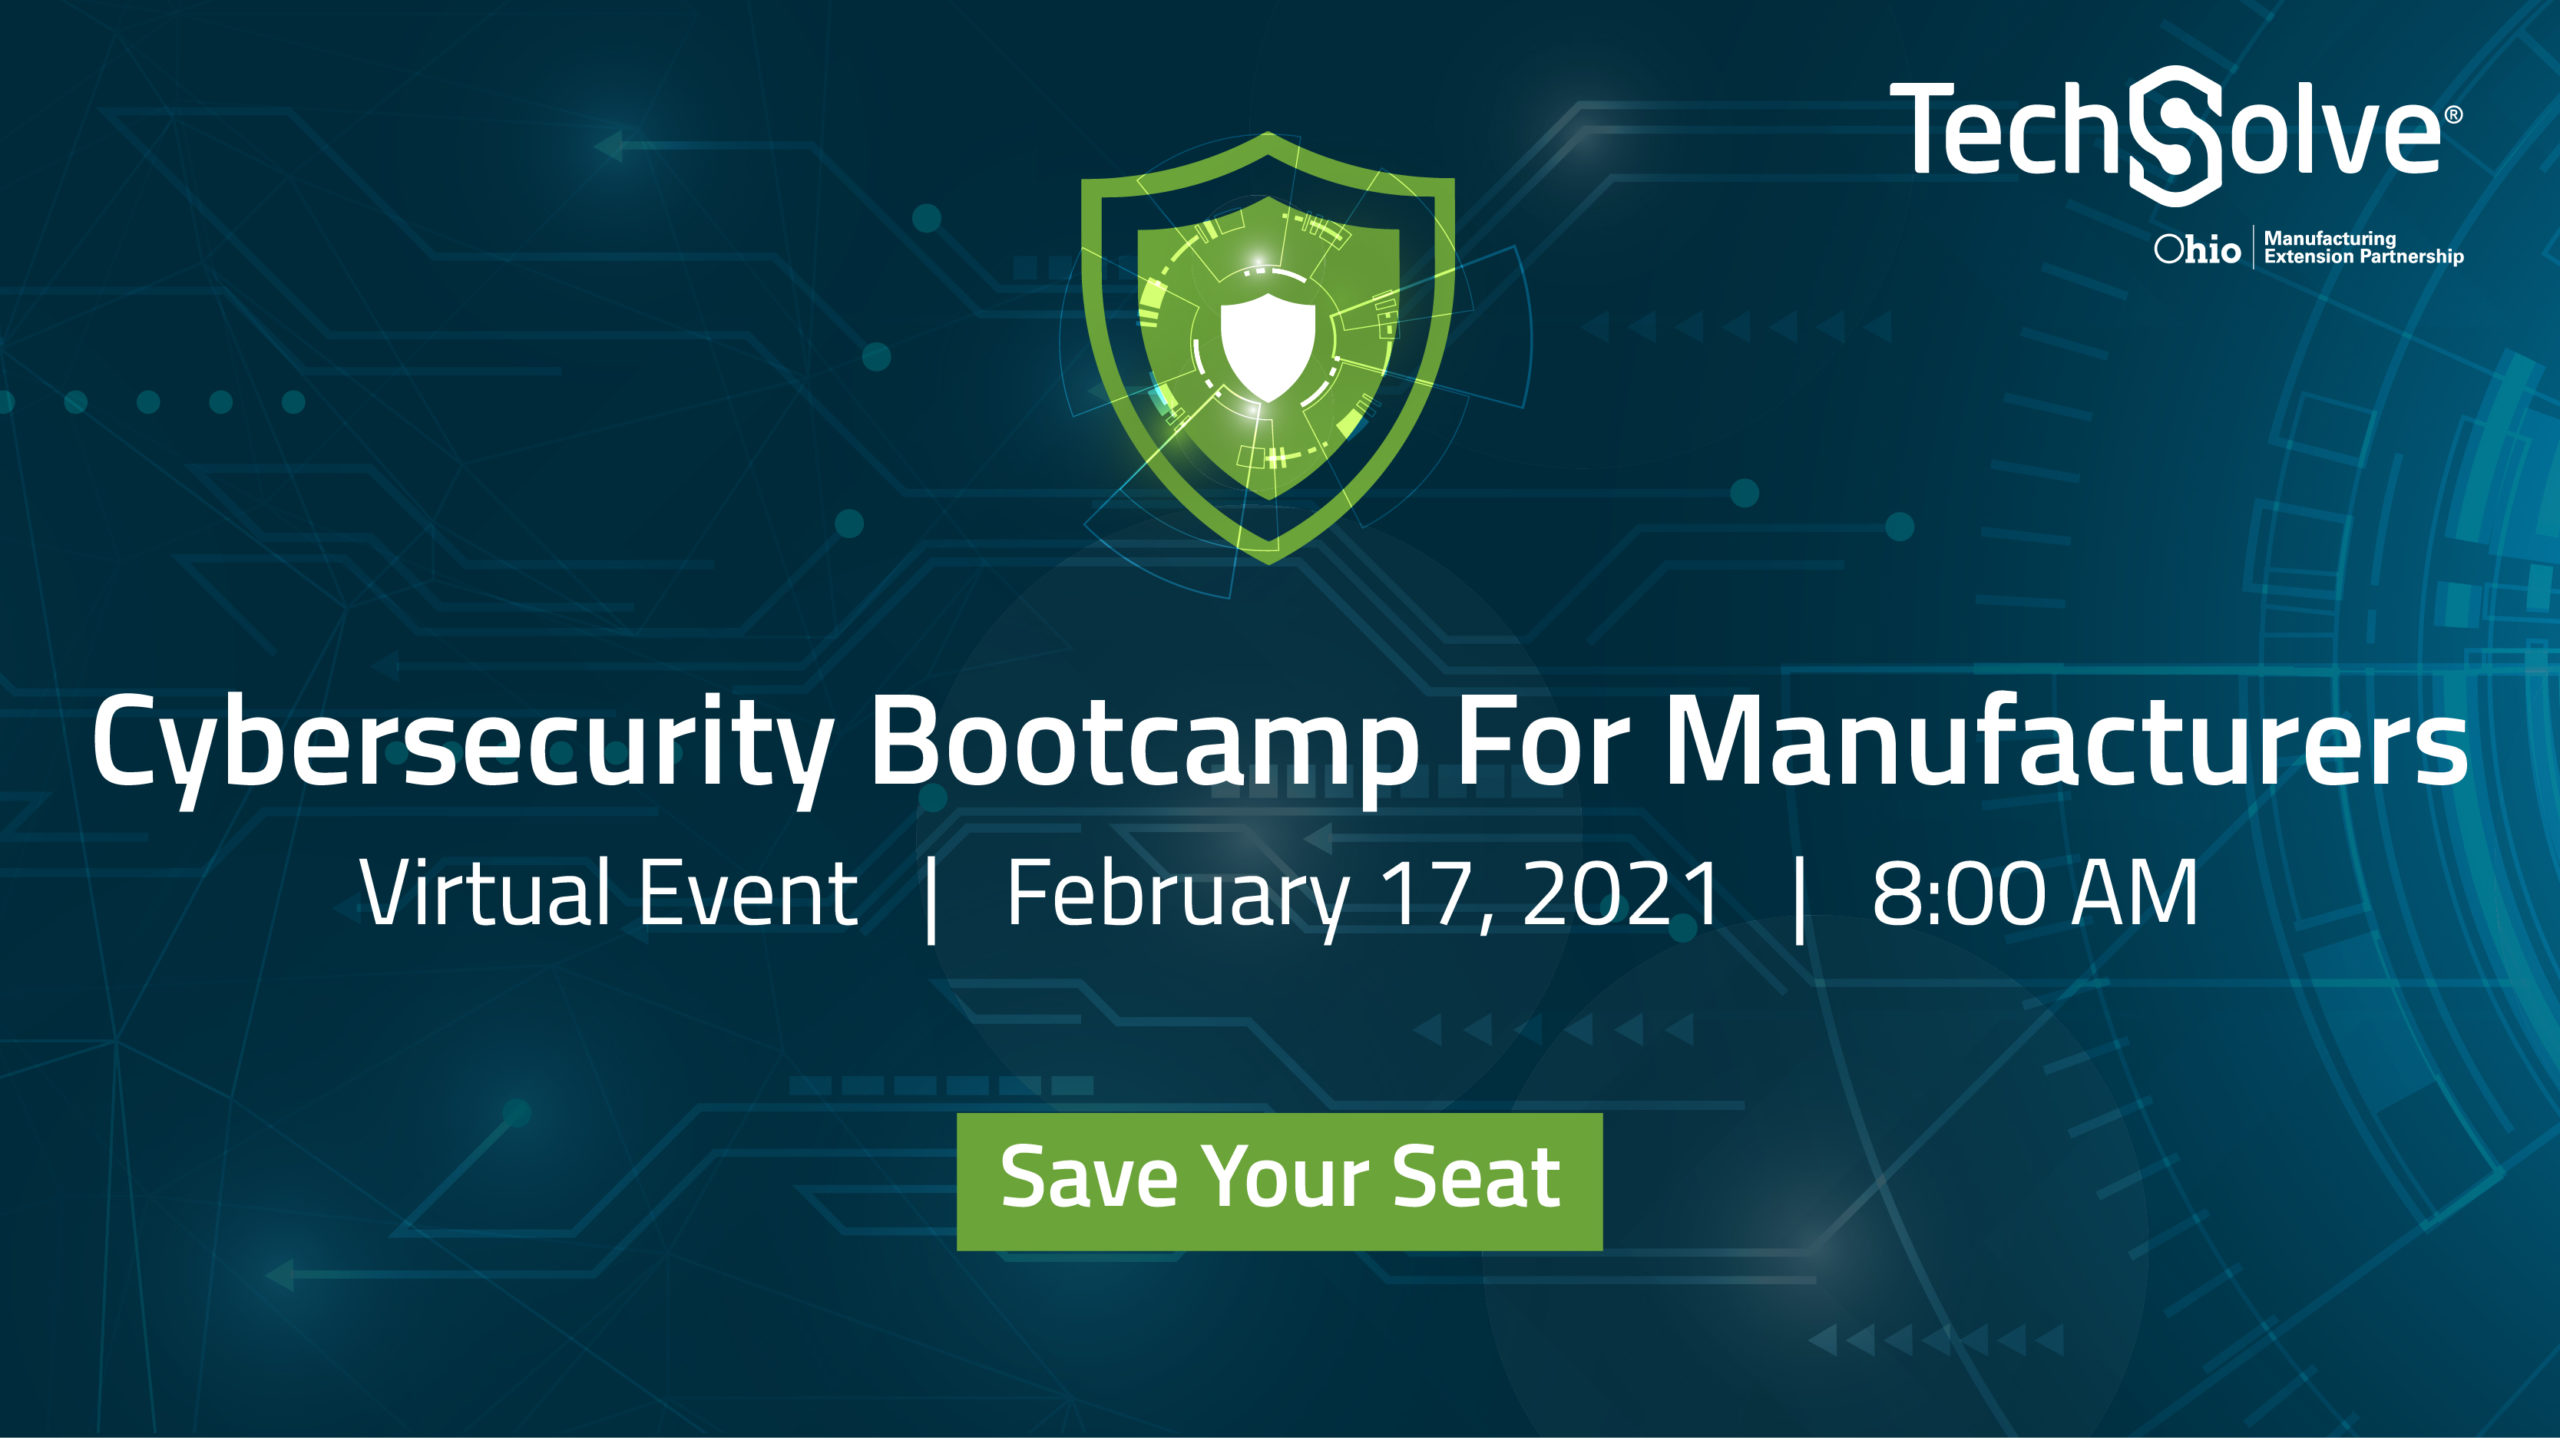 TechSolve Cybersecurity Bootcamp